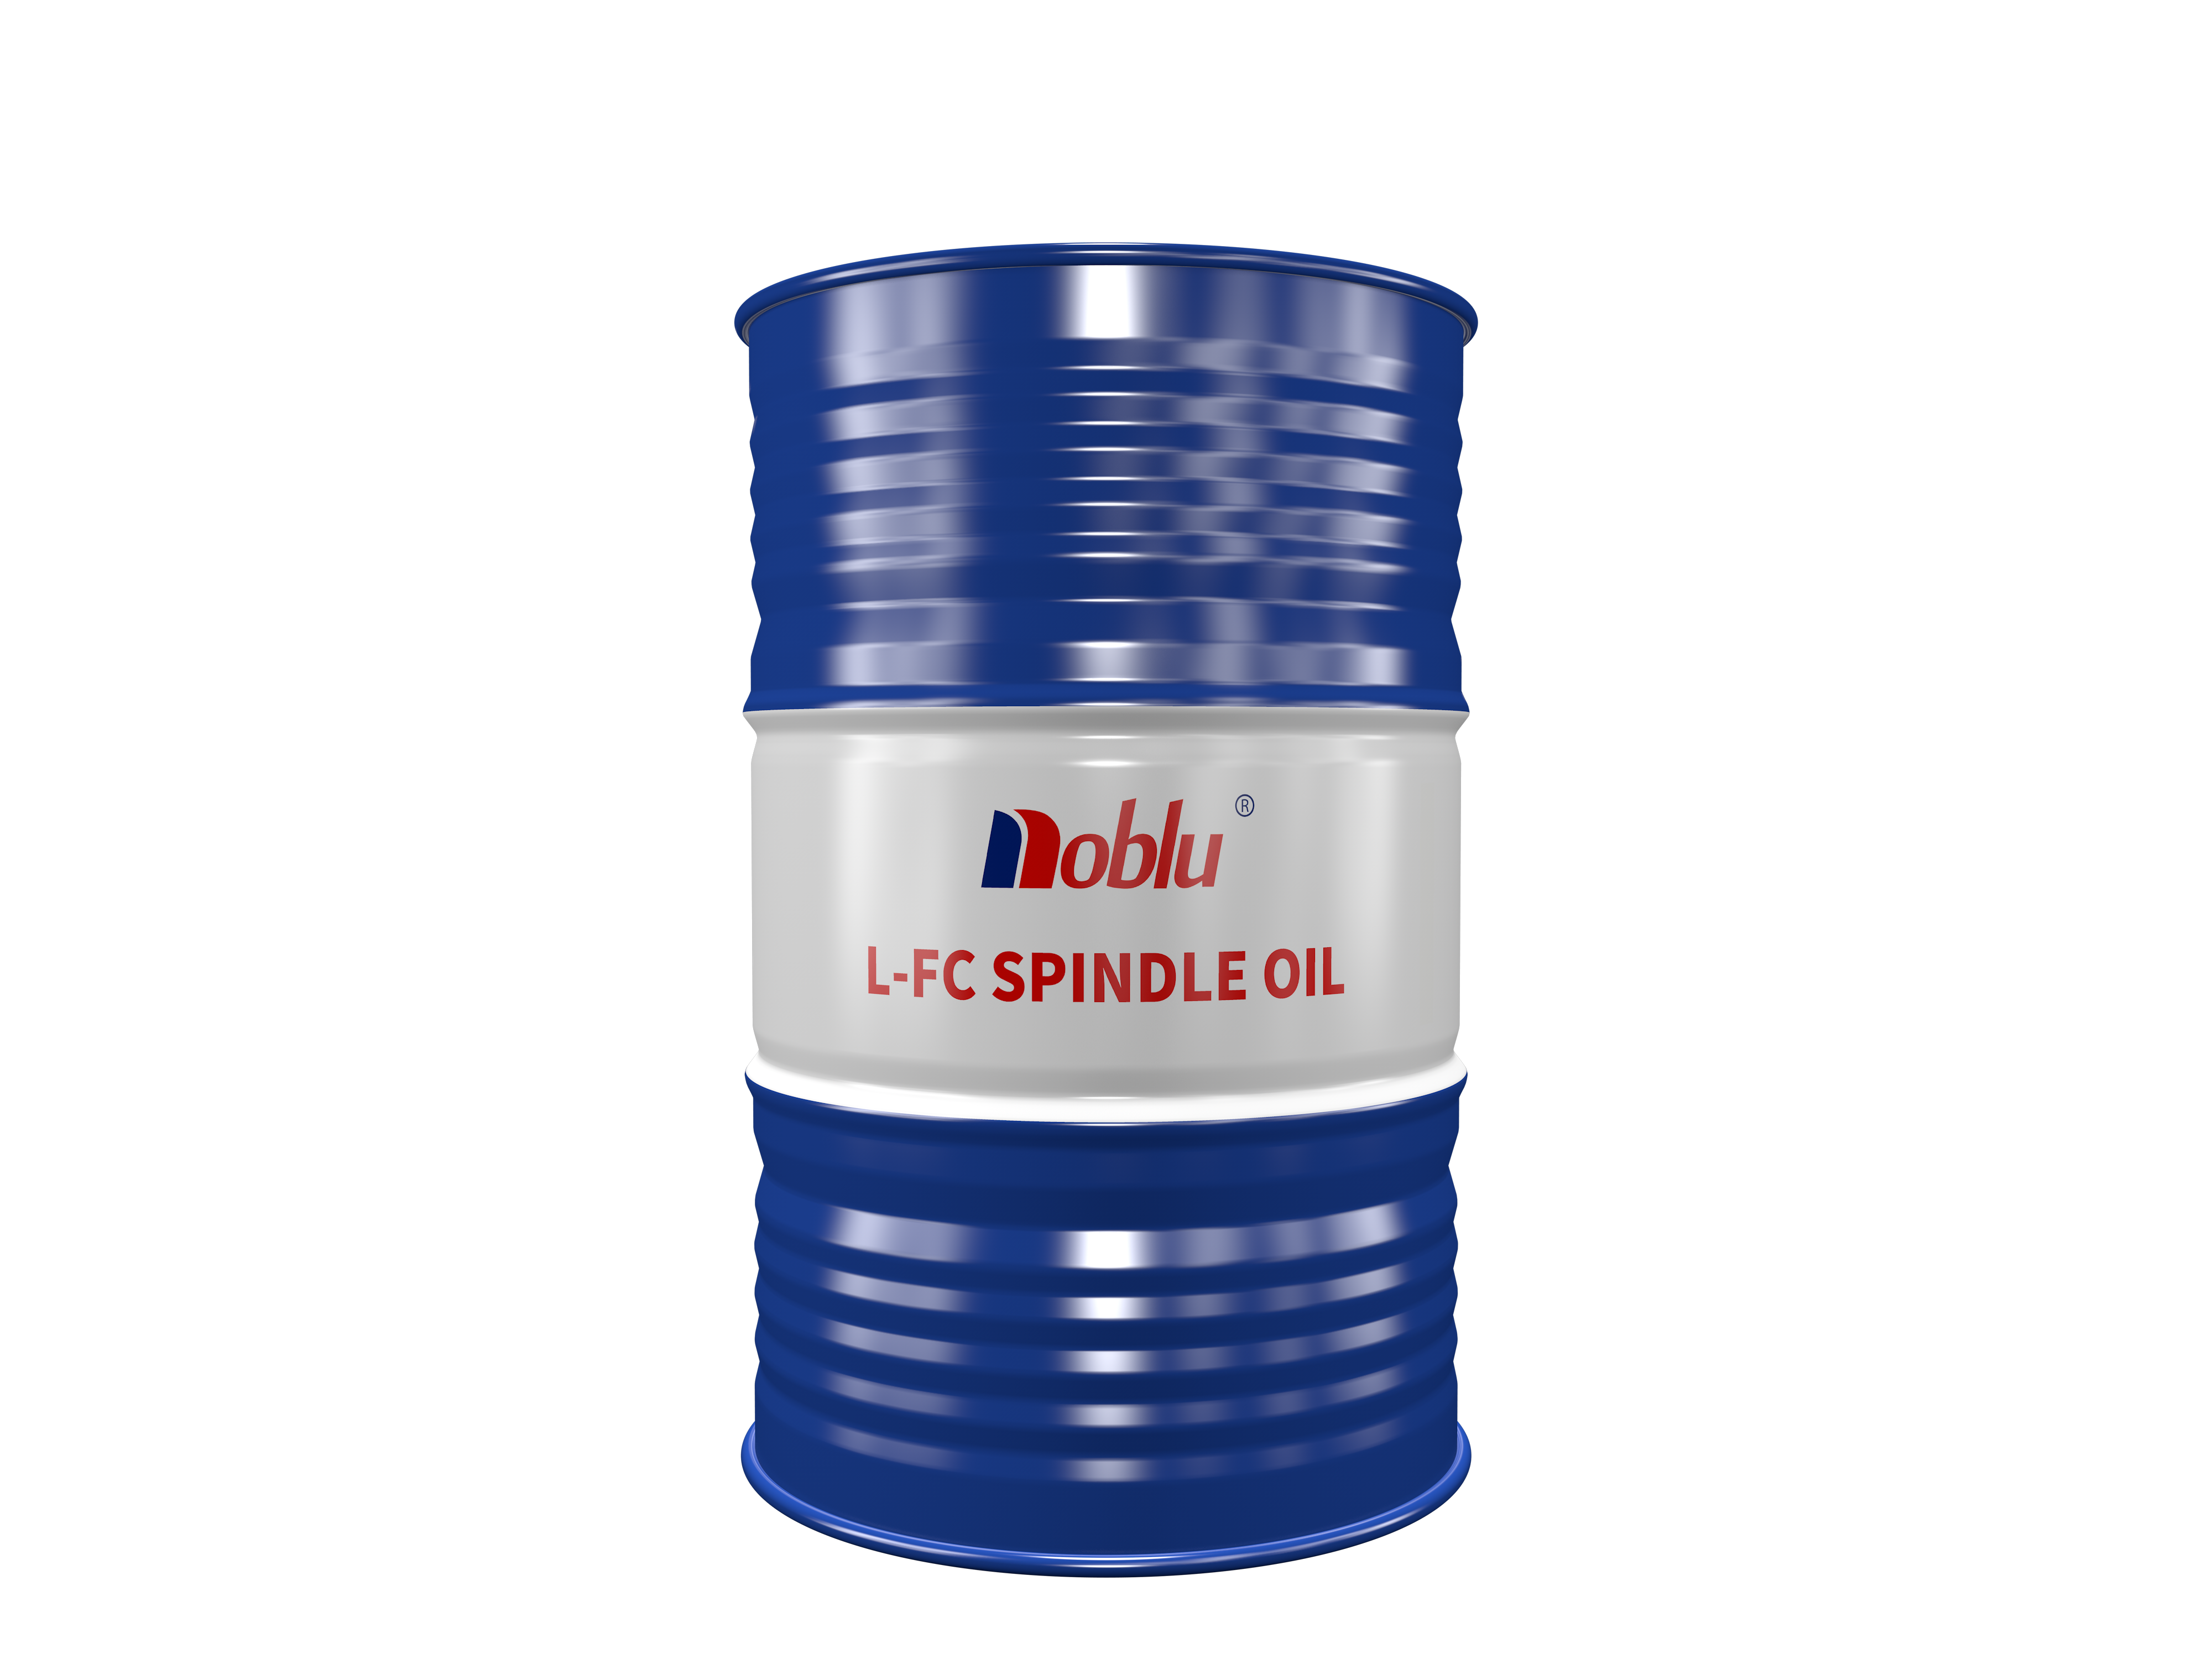 L-FC spindle oil